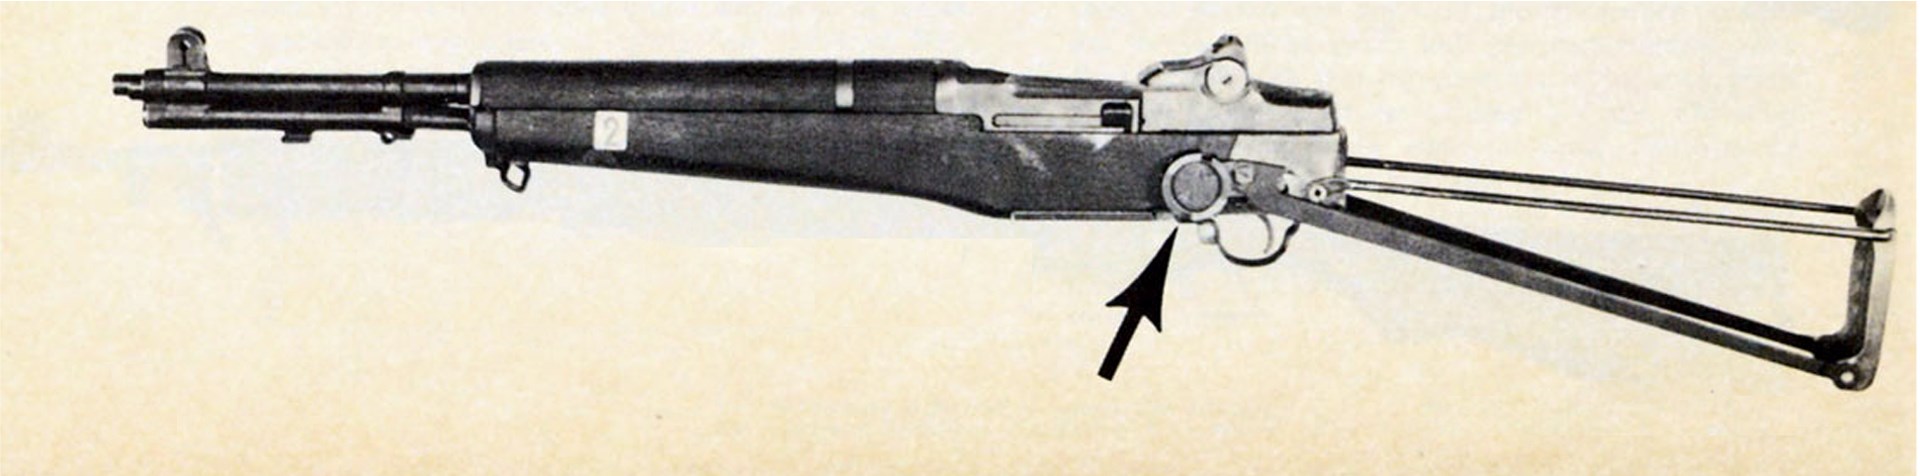 U.S. Rifle Cal. .30 M1E5 with Stock T6 (stock extended) and M15 Grenade Sight mounting plate (arrow).